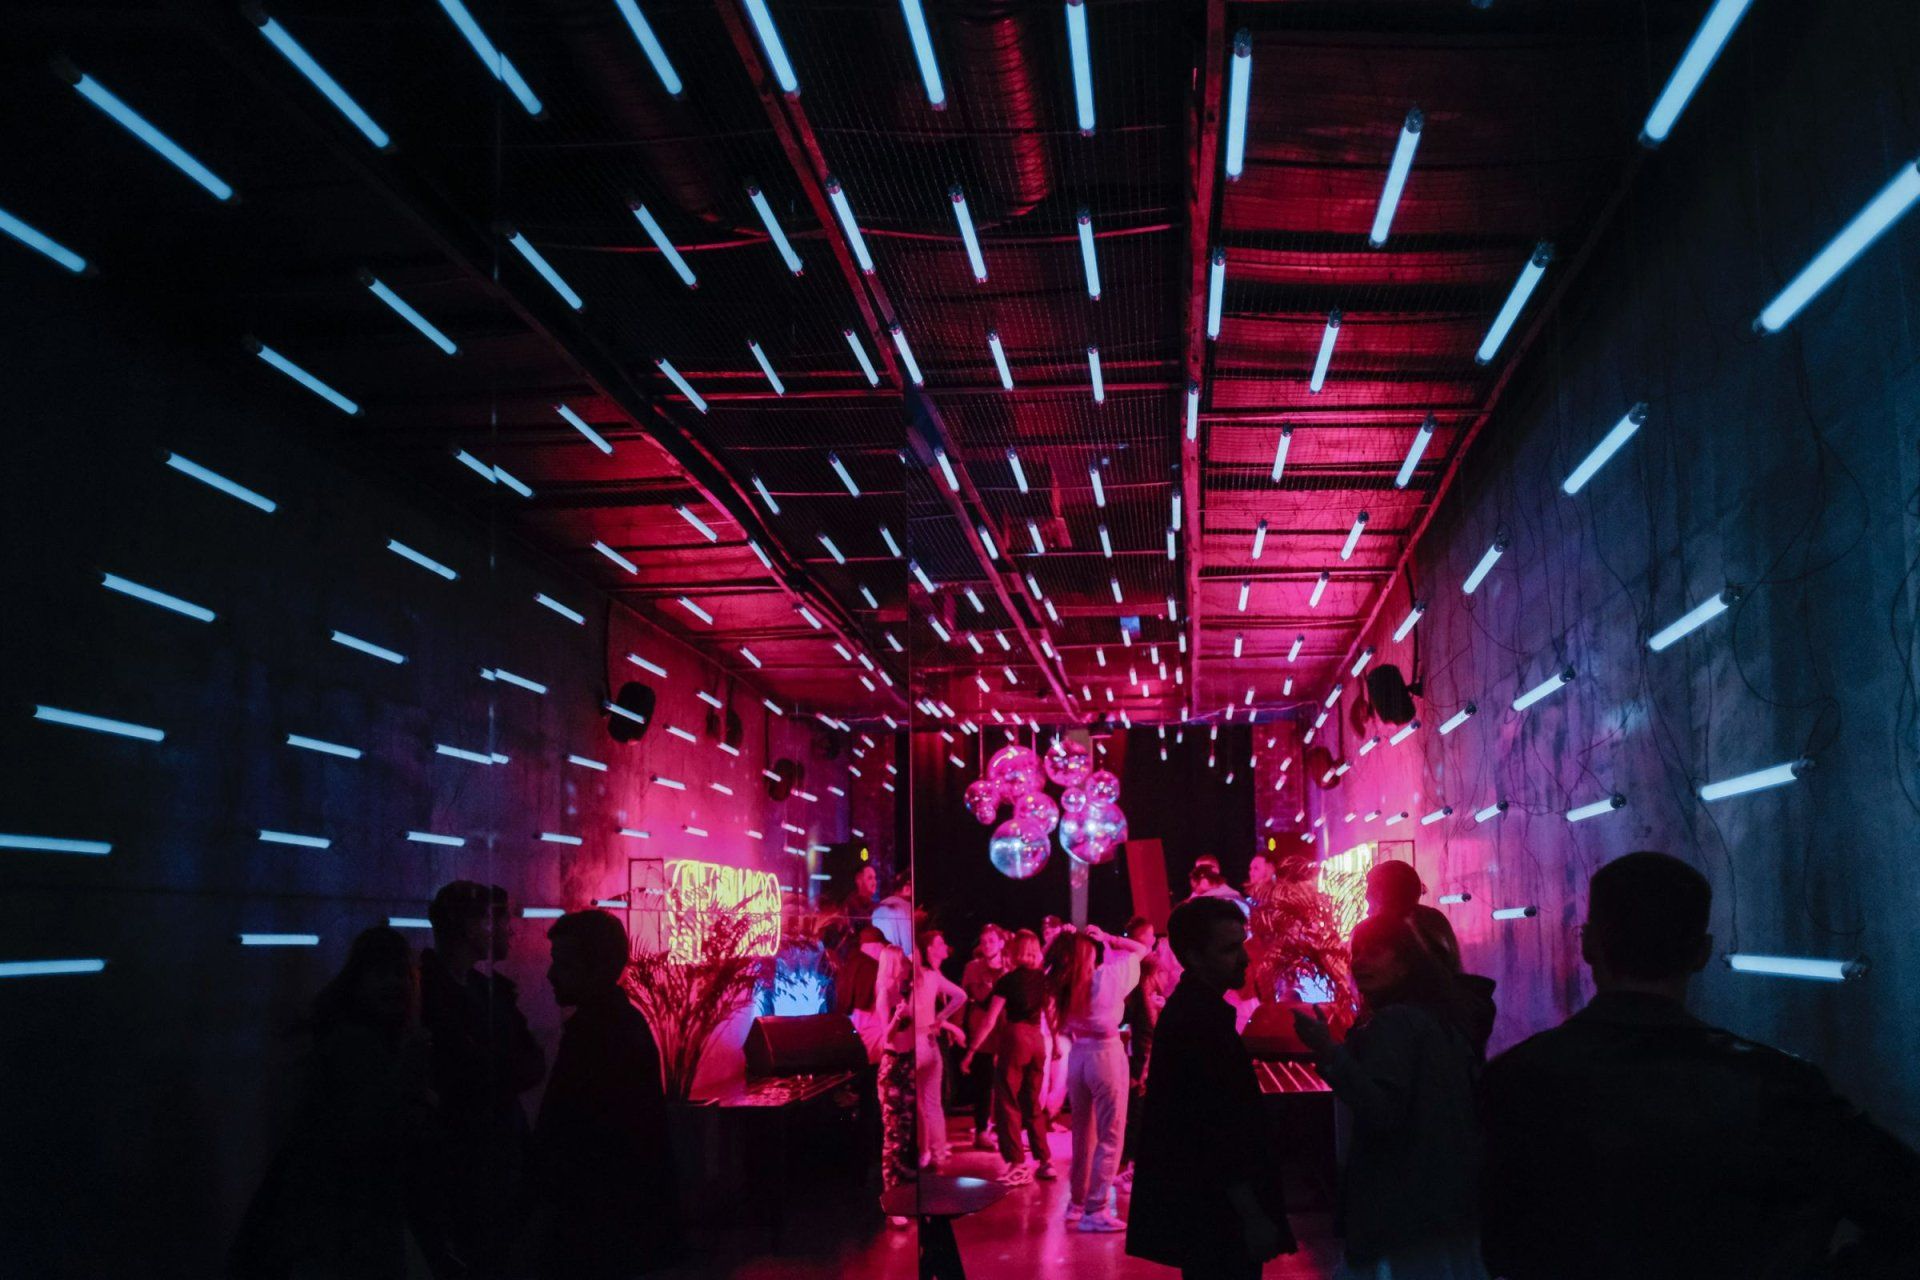 a group of people are standing in a dark room with neon lights hanging from the ceiling